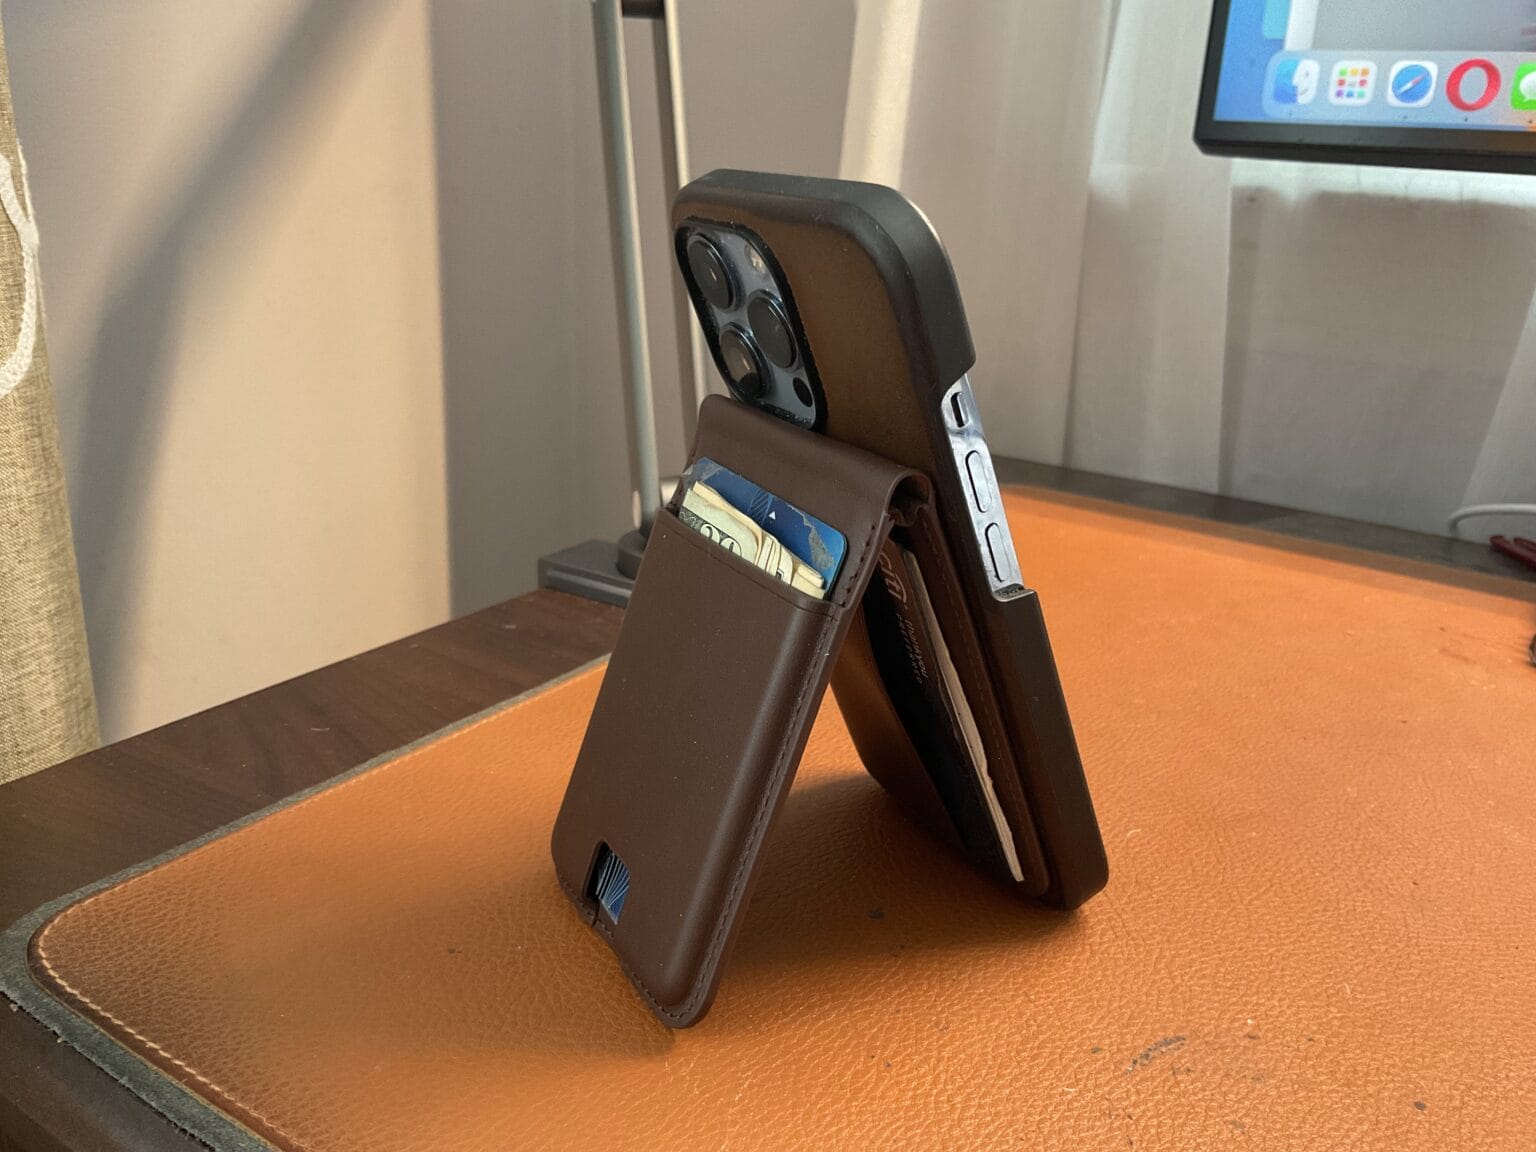 Here's the Ezmo, laden with cash and cards, serving as an iPhone stand. You can widen the stand's angle and mount the iPhone in landscape orientation, too.